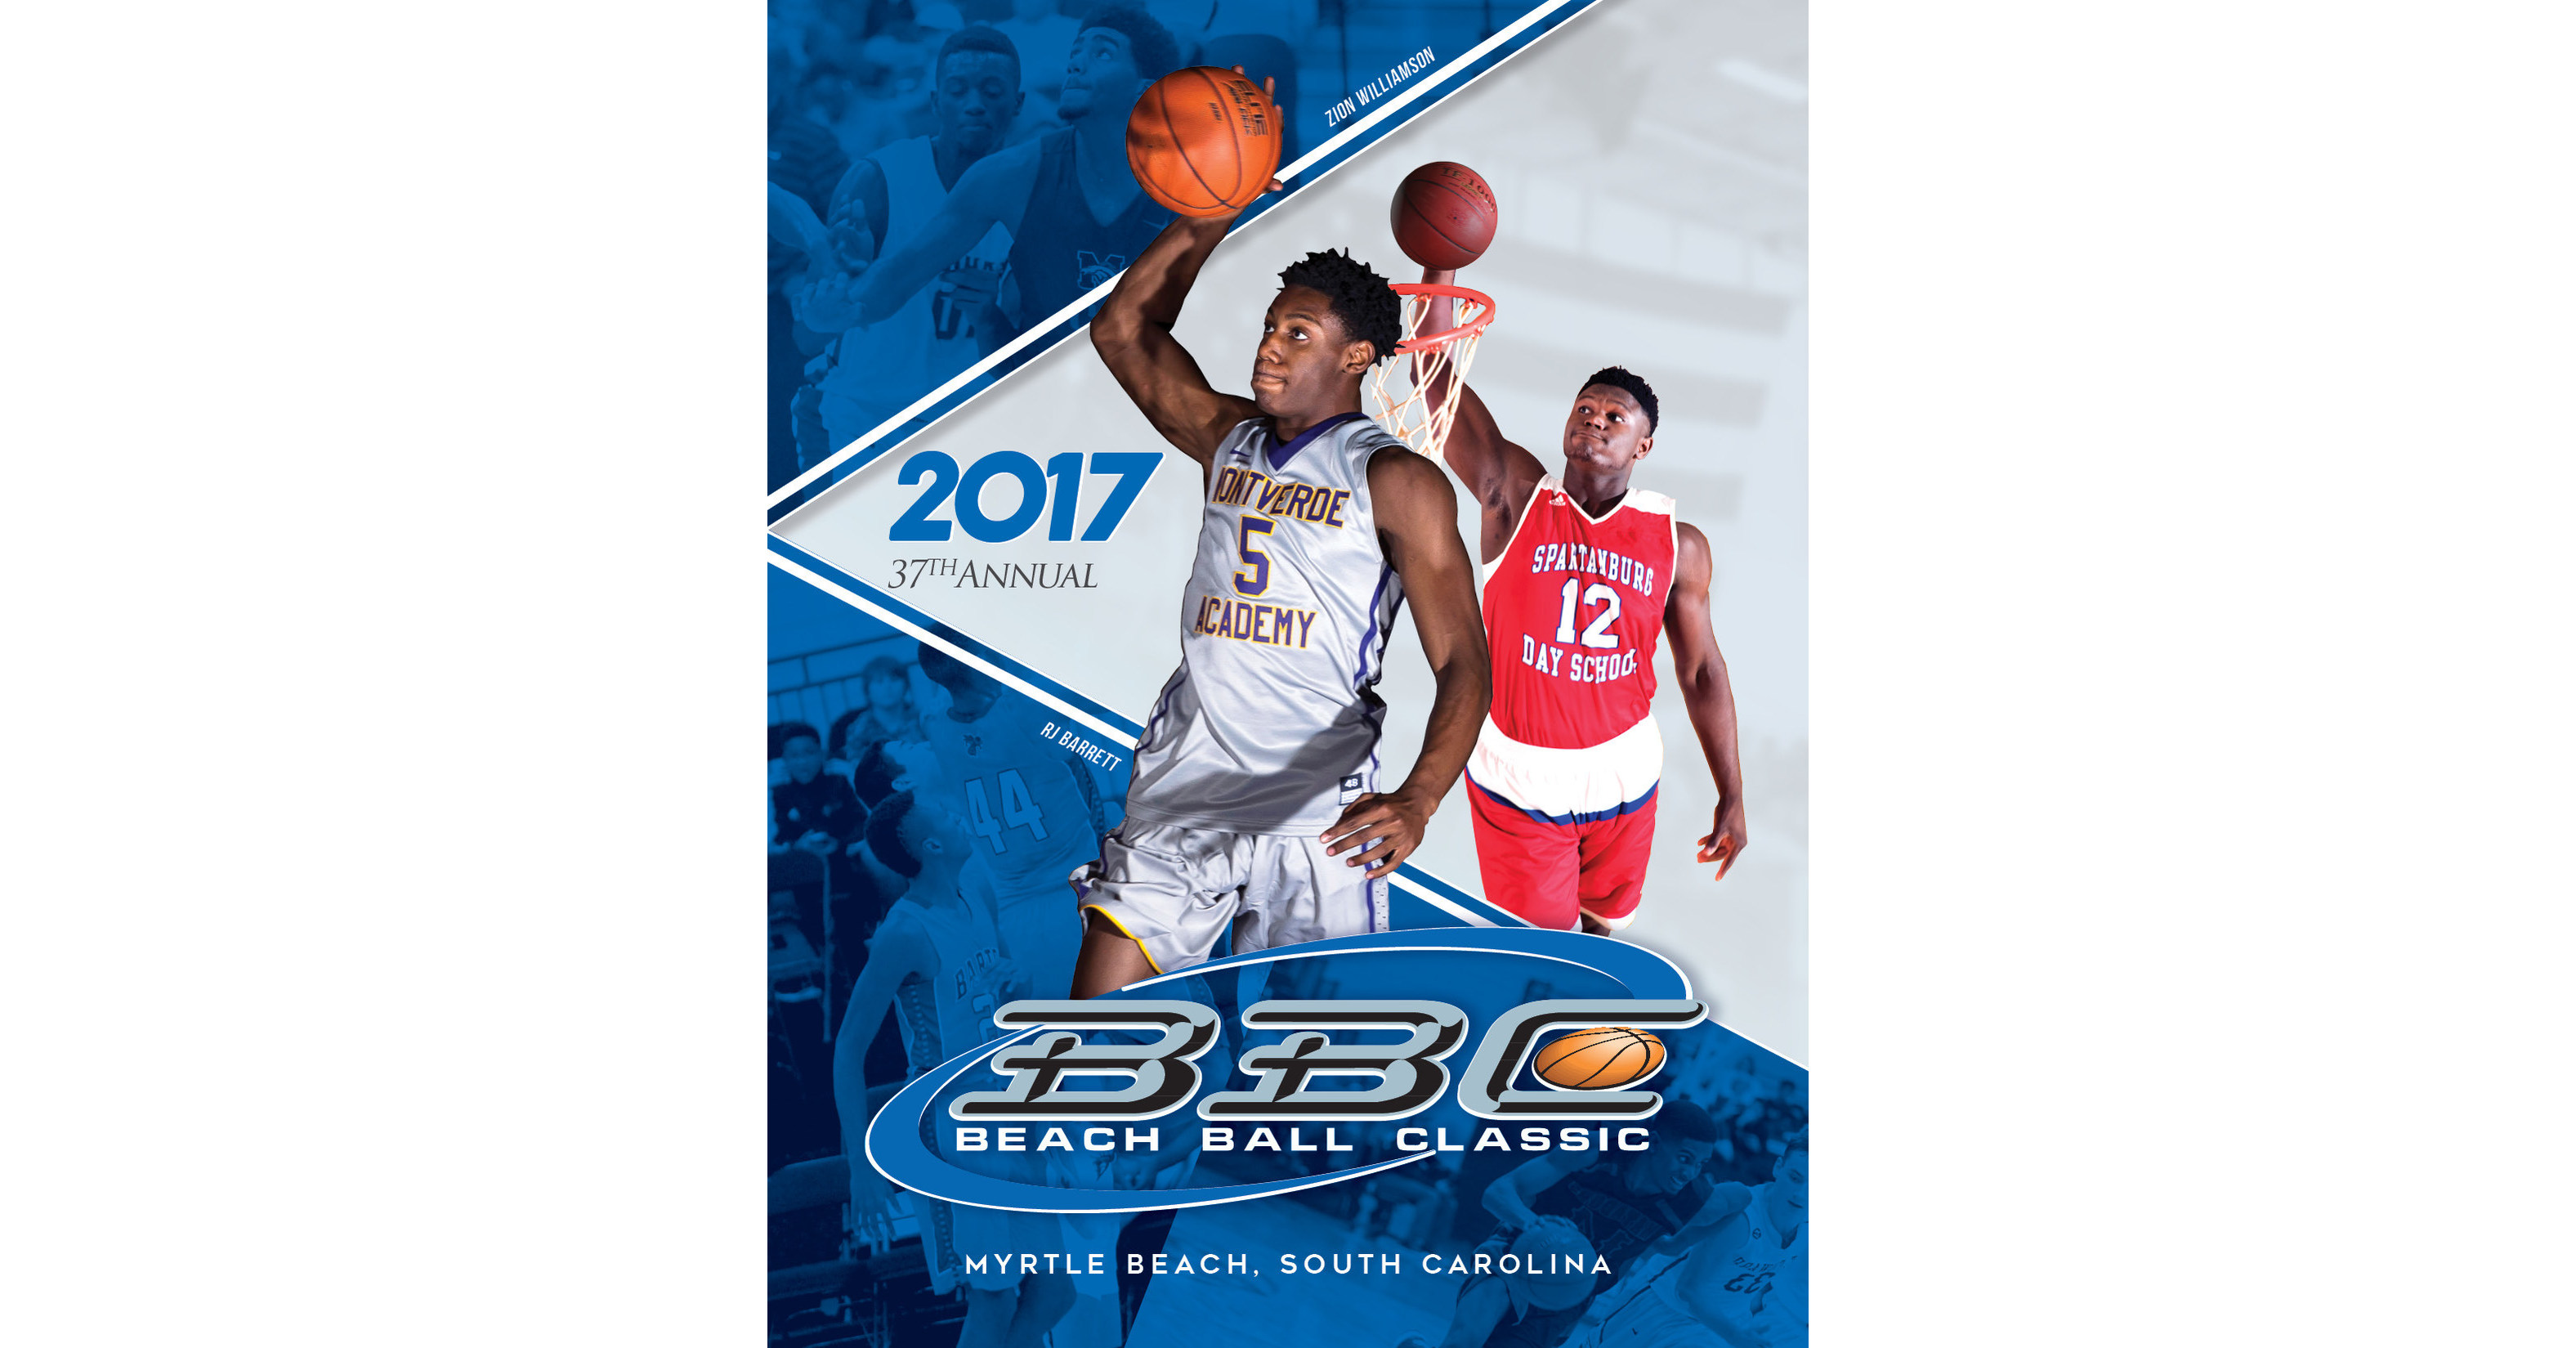 37th Annual Beach Ball Classic to Feature the Nation's Top Ranked Players